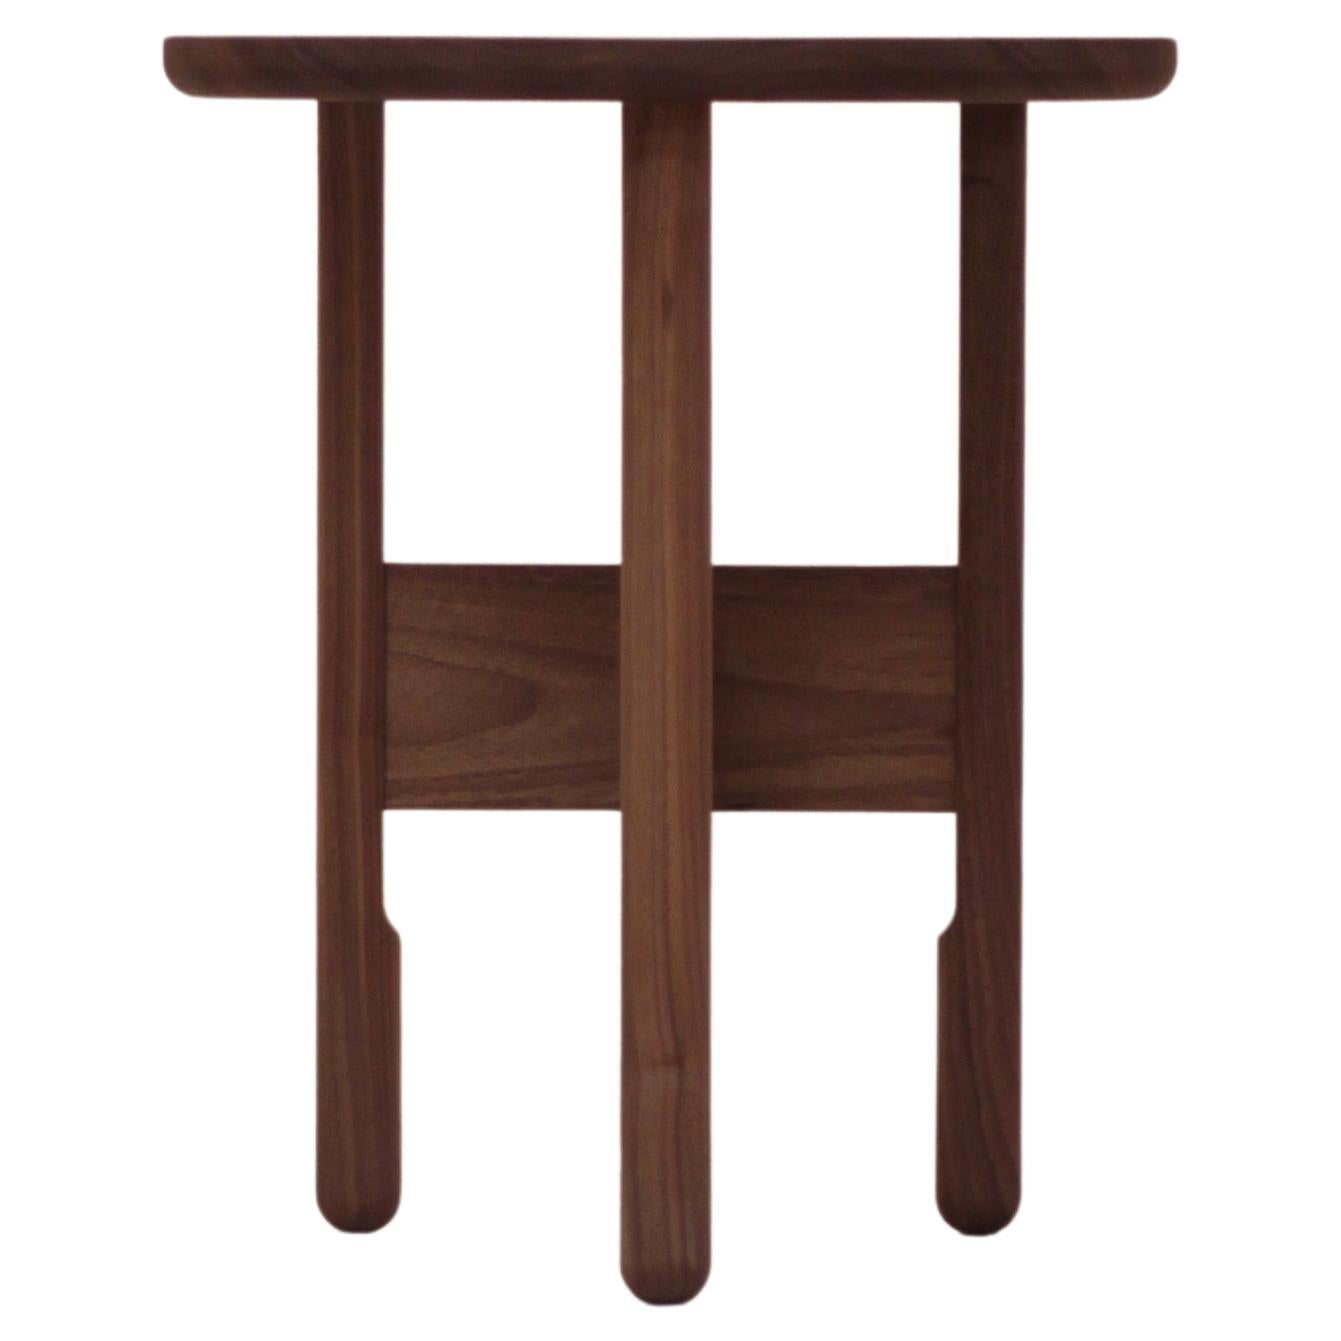 Simple, elegant and iconic the Hanne side table is the perfect companion to your favorite sofa or lounge chair. Featuring a distinctive lowered leg brace, this 3 legged table is sturdy and playful, changing appearance from every angle. The round